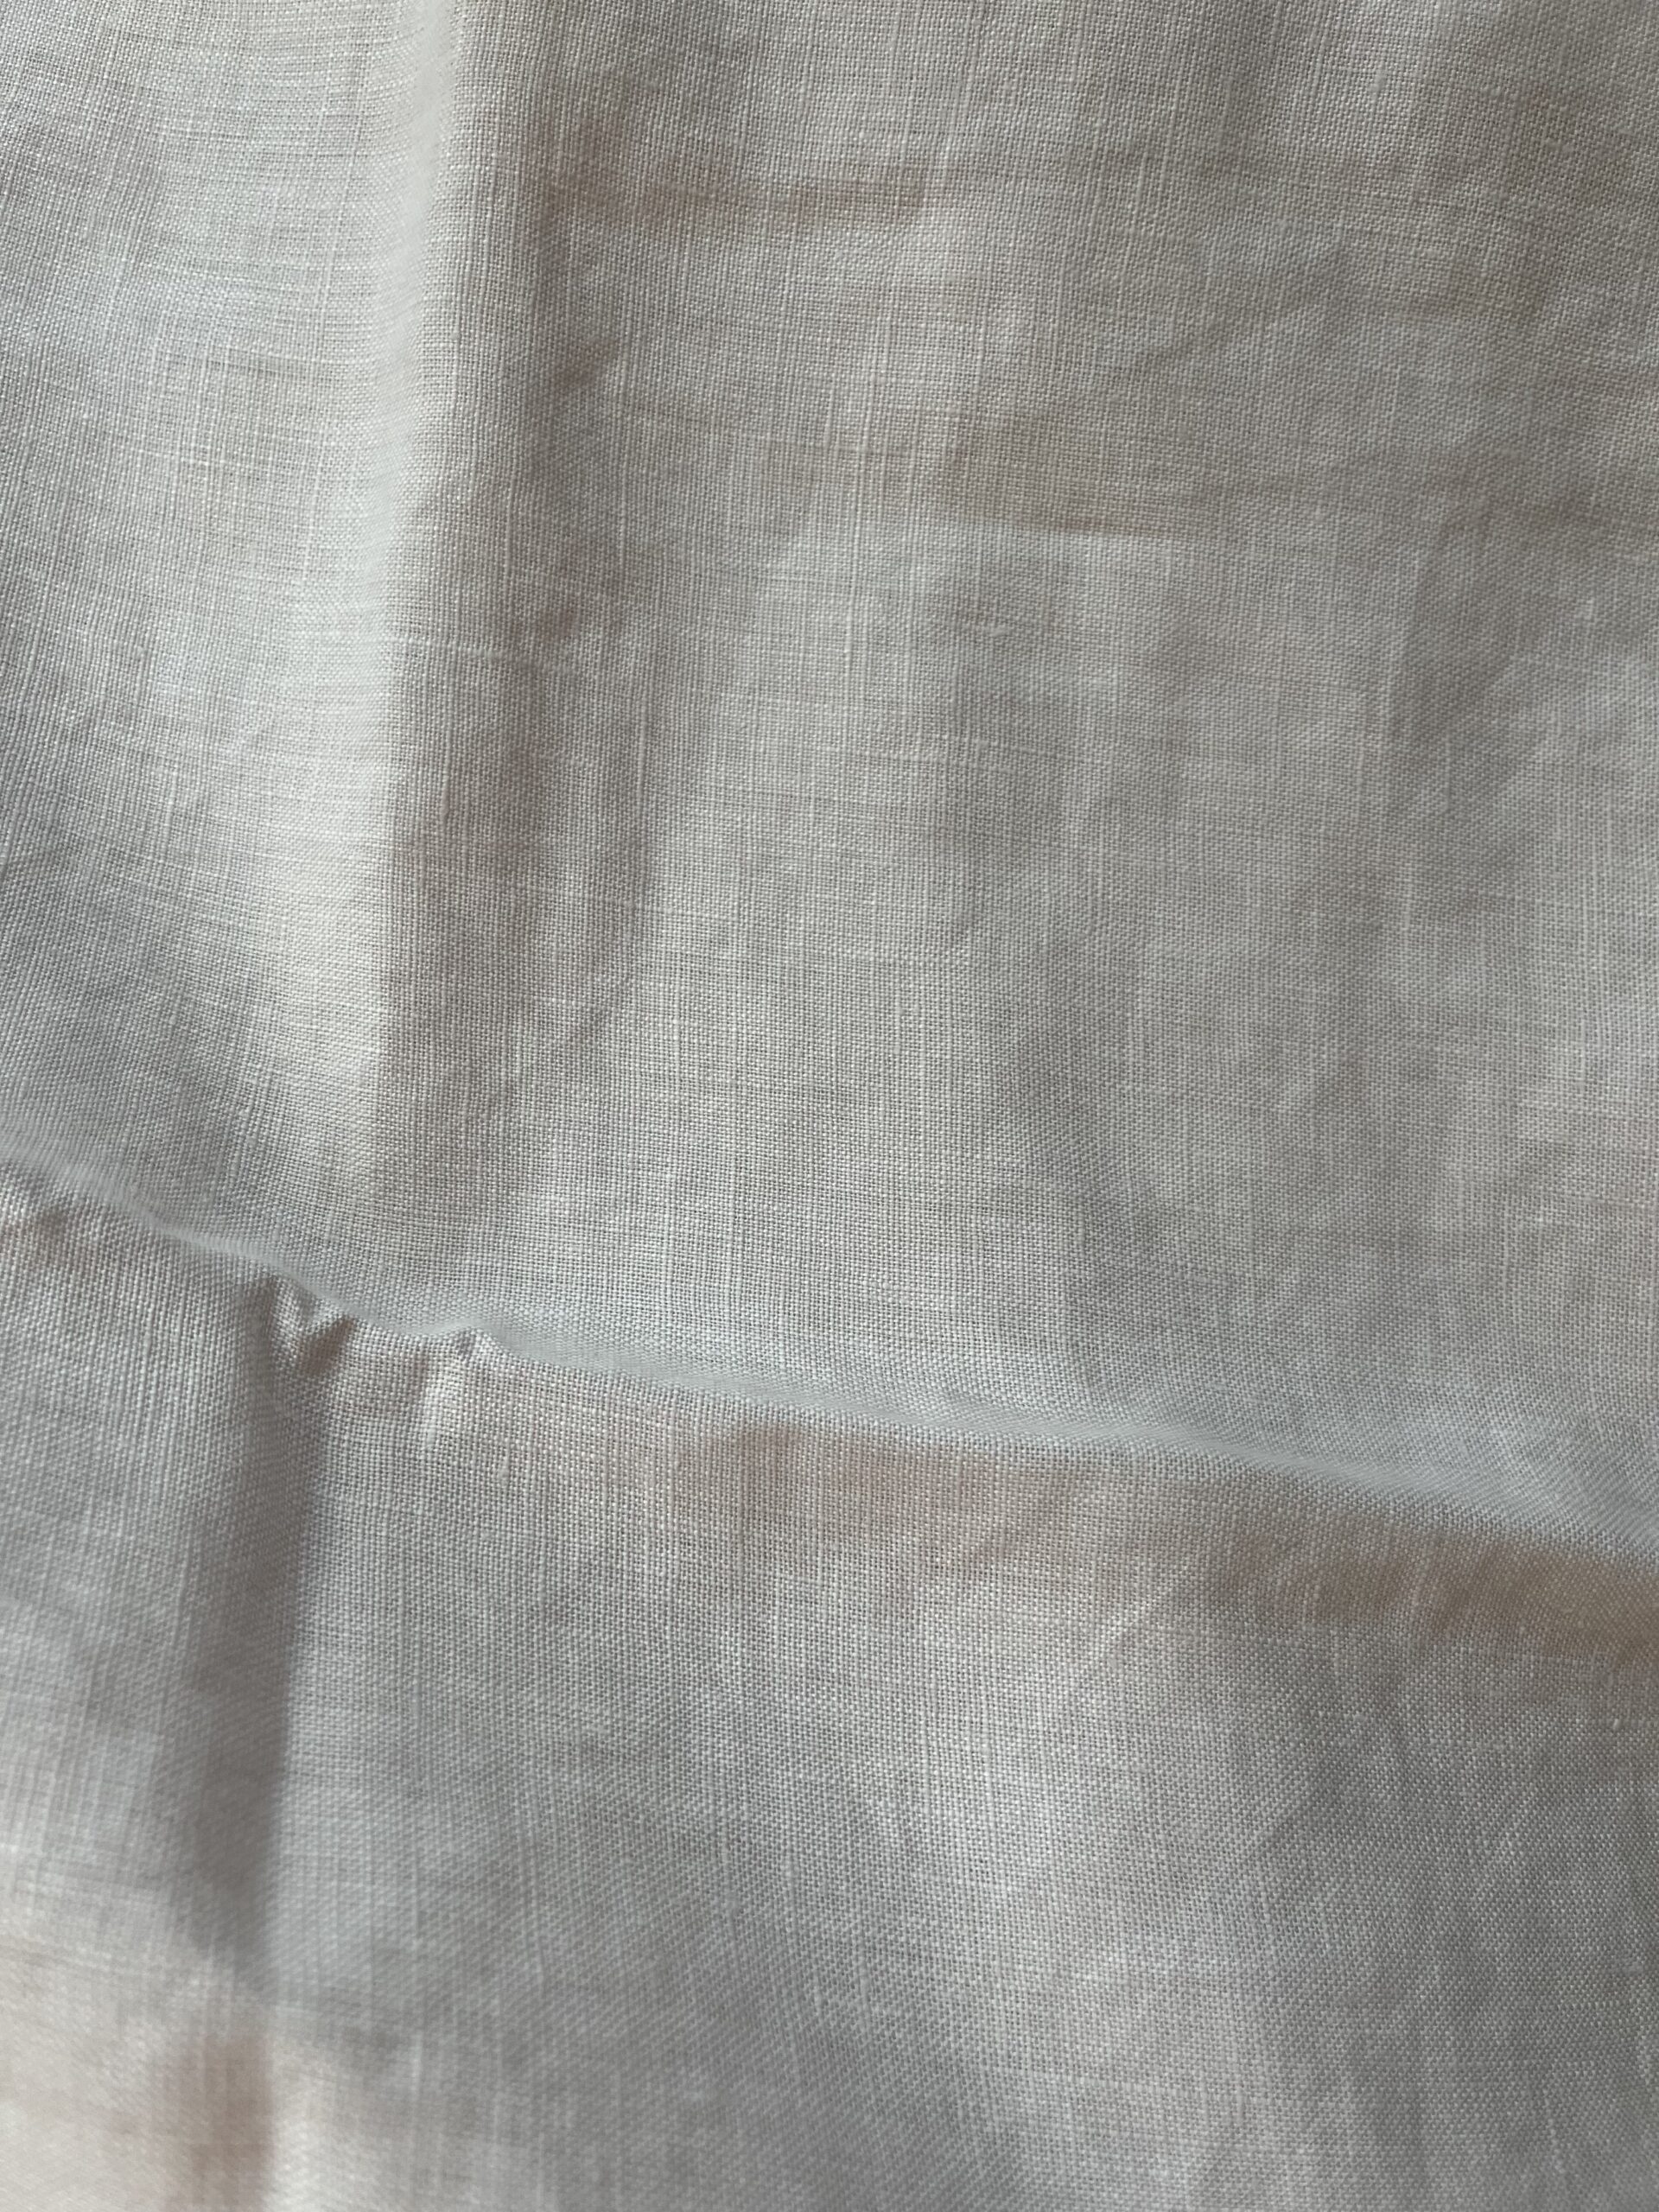 Plain white linen fabric with visible folds and creases. The texture is slightly rough and the material appears lightweight.